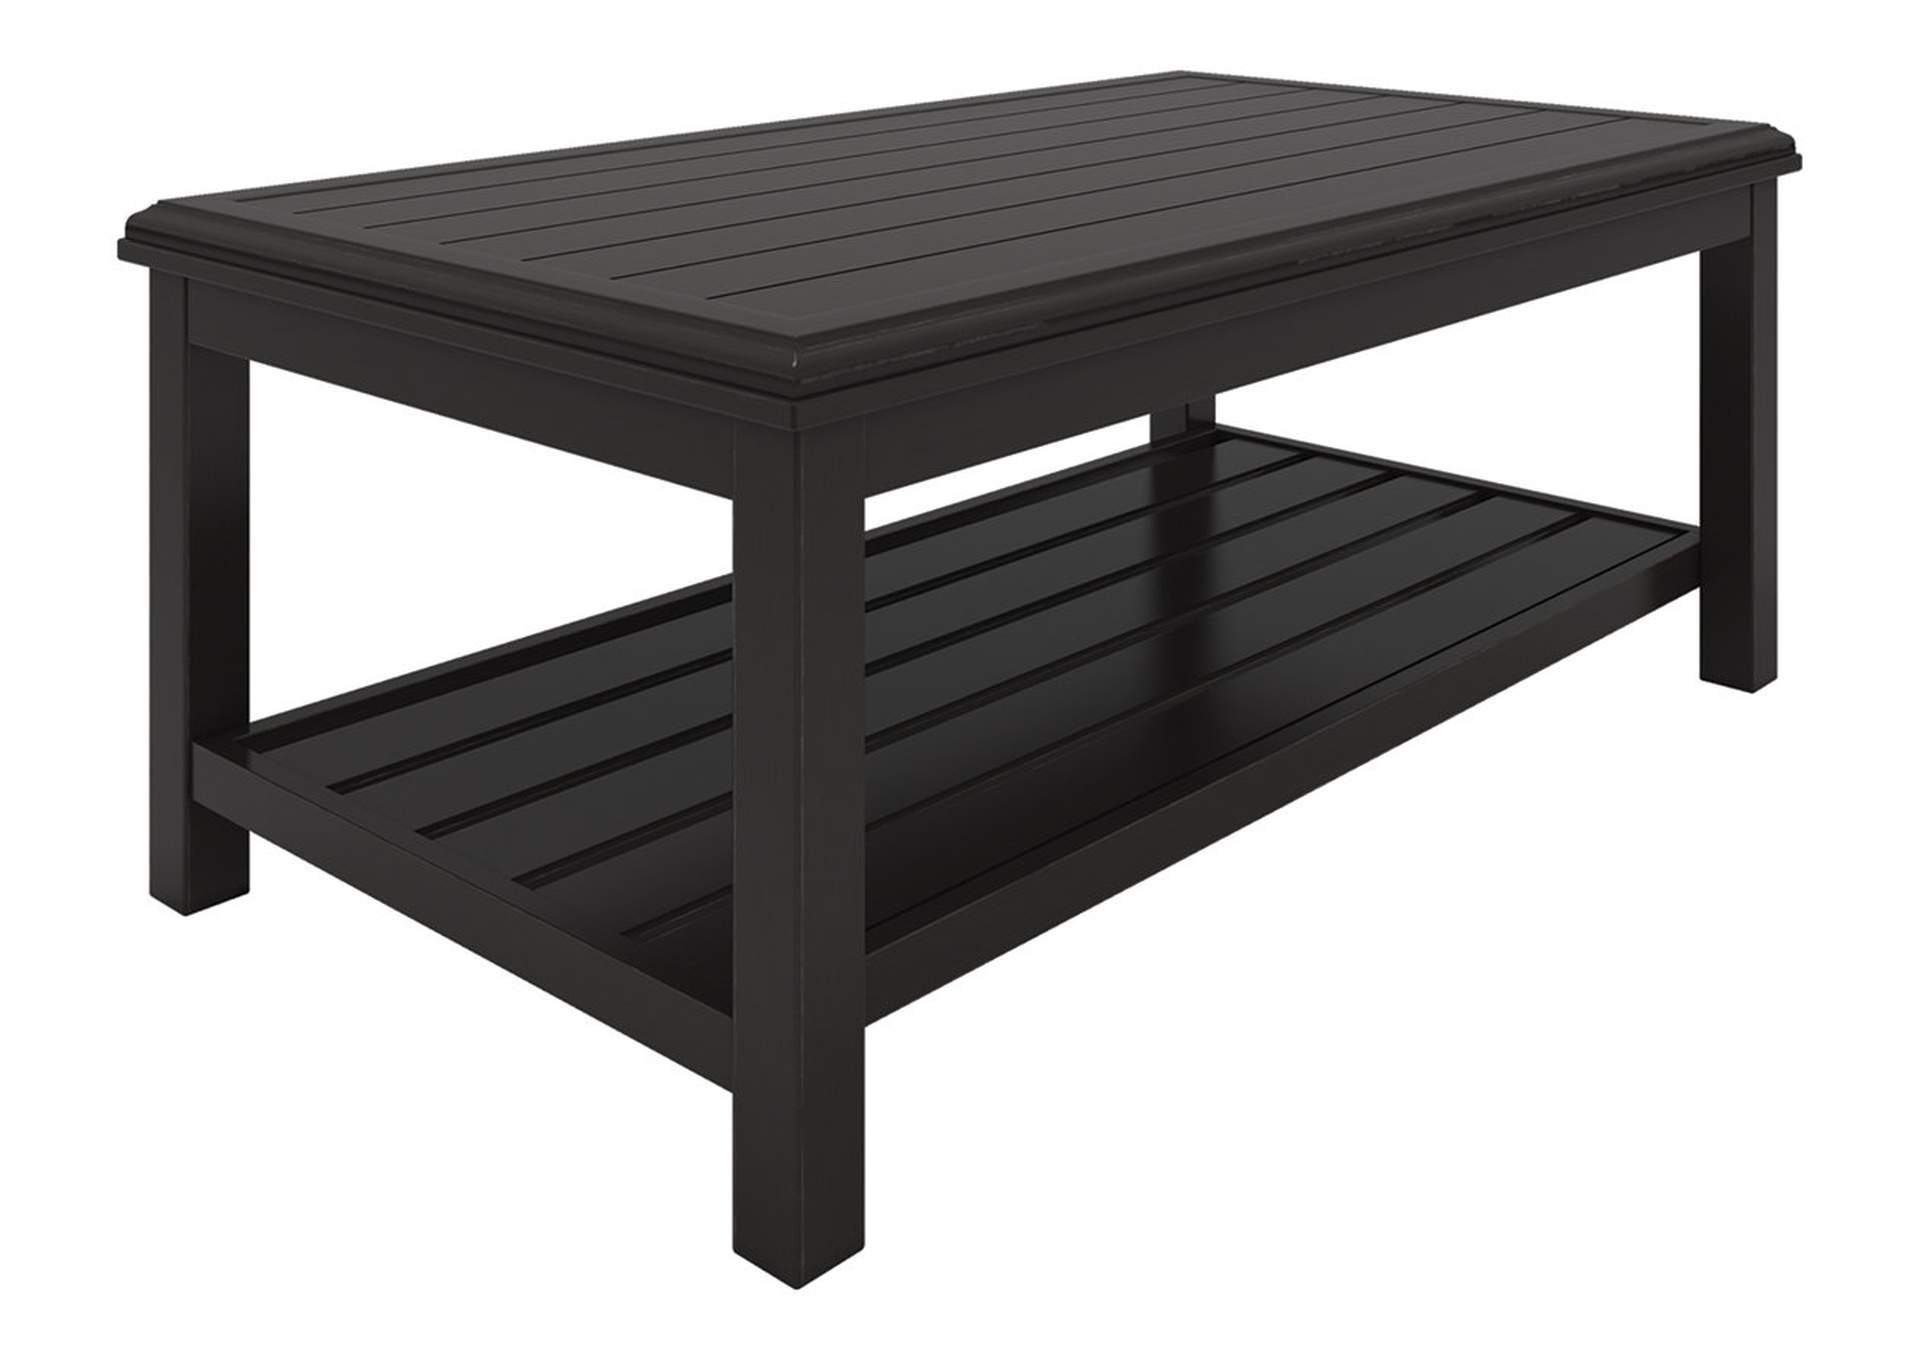 Castle Island Coffee Table,Direct To Consumer Express